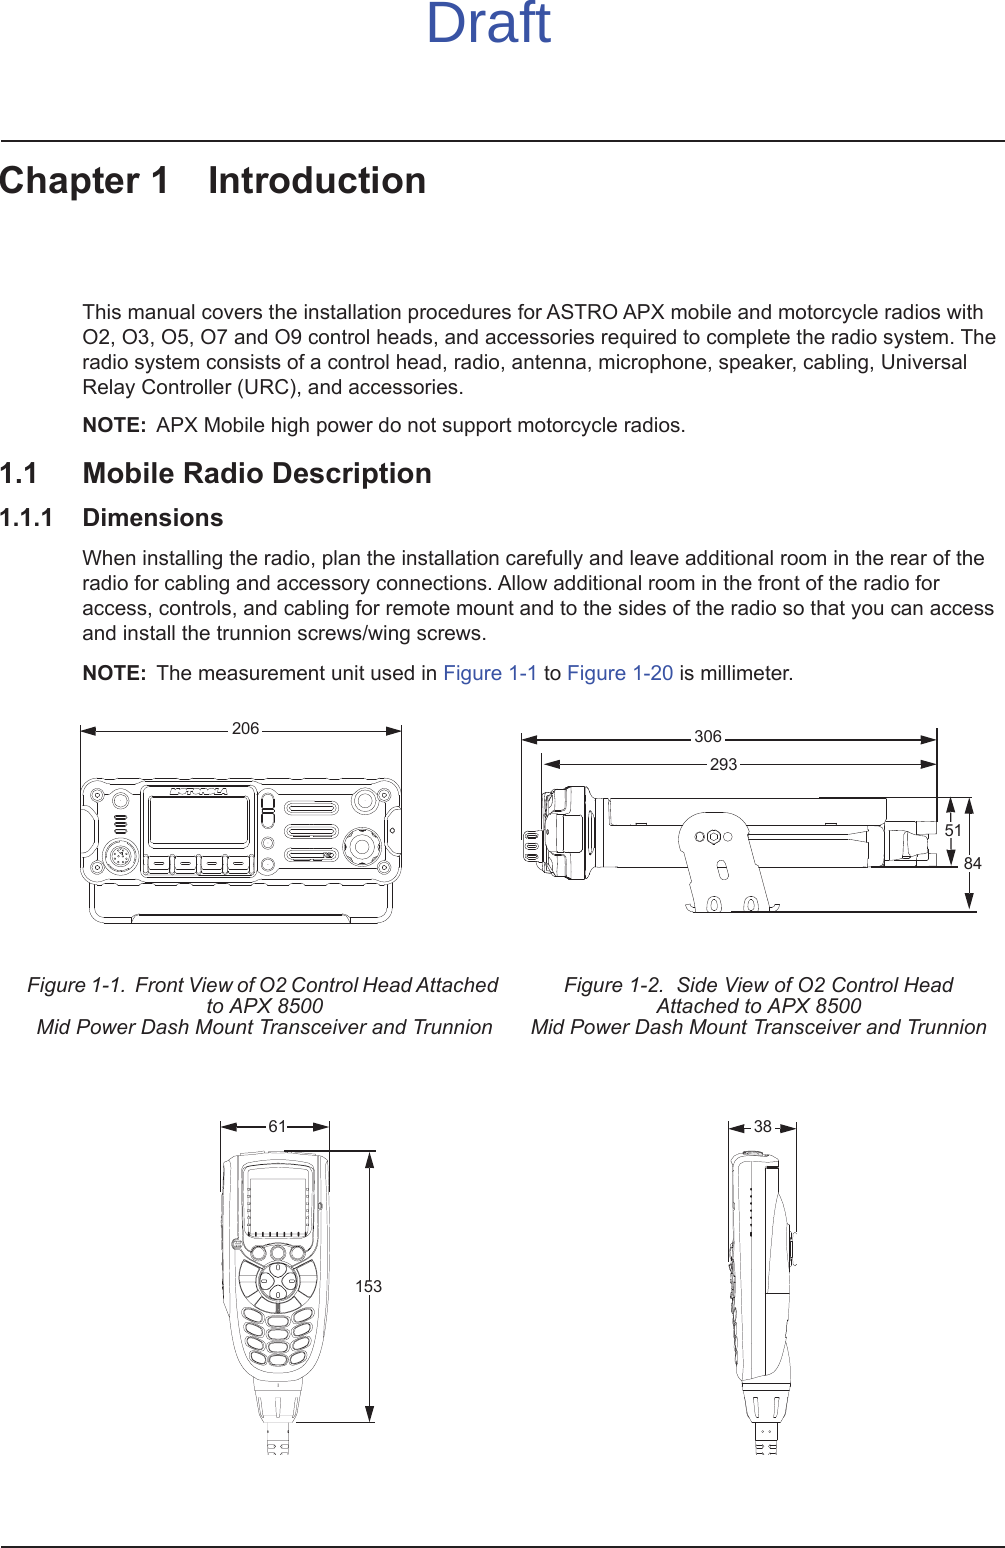 Chapter 1 IntroductionThis manual covers the installation procedures for ASTRO APX mobile and motorcycle radios with O2, O3, O5, O7 and O9 control heads, and accessories required to complete the radio system. The radio system consists of a control head, radio, antenna, microphone, speaker, cabling, Universal Relay Controller (URC), and accessories.NOTE: APX Mobile high power do not support motorcycle radios.1.1 Mobile Radio Description1.1.1 DimensionsWhen installing the radio, plan the installation carefully and leave additional room in the rear of the radio for cabling and accessory connections. Allow additional room in the front of the radio for access, controls, and cabling for remote mount and to the sides of the radio so that you can access and install the trunnion screws/wing screws.NOTE: The measurement unit used in Figure 1-1 to Figure 1-20 is millimeter.Figure 1-1.  Front View of O2 Control Head Attached to APX 8500Mid Power Dash Mount Transceiver and TrunnionFigure 1-2.  Side View of O2 Control Head Attached to APX 8500 Mid Power Dash Mount Transceiver and Trunnion20630651842936115338Draft